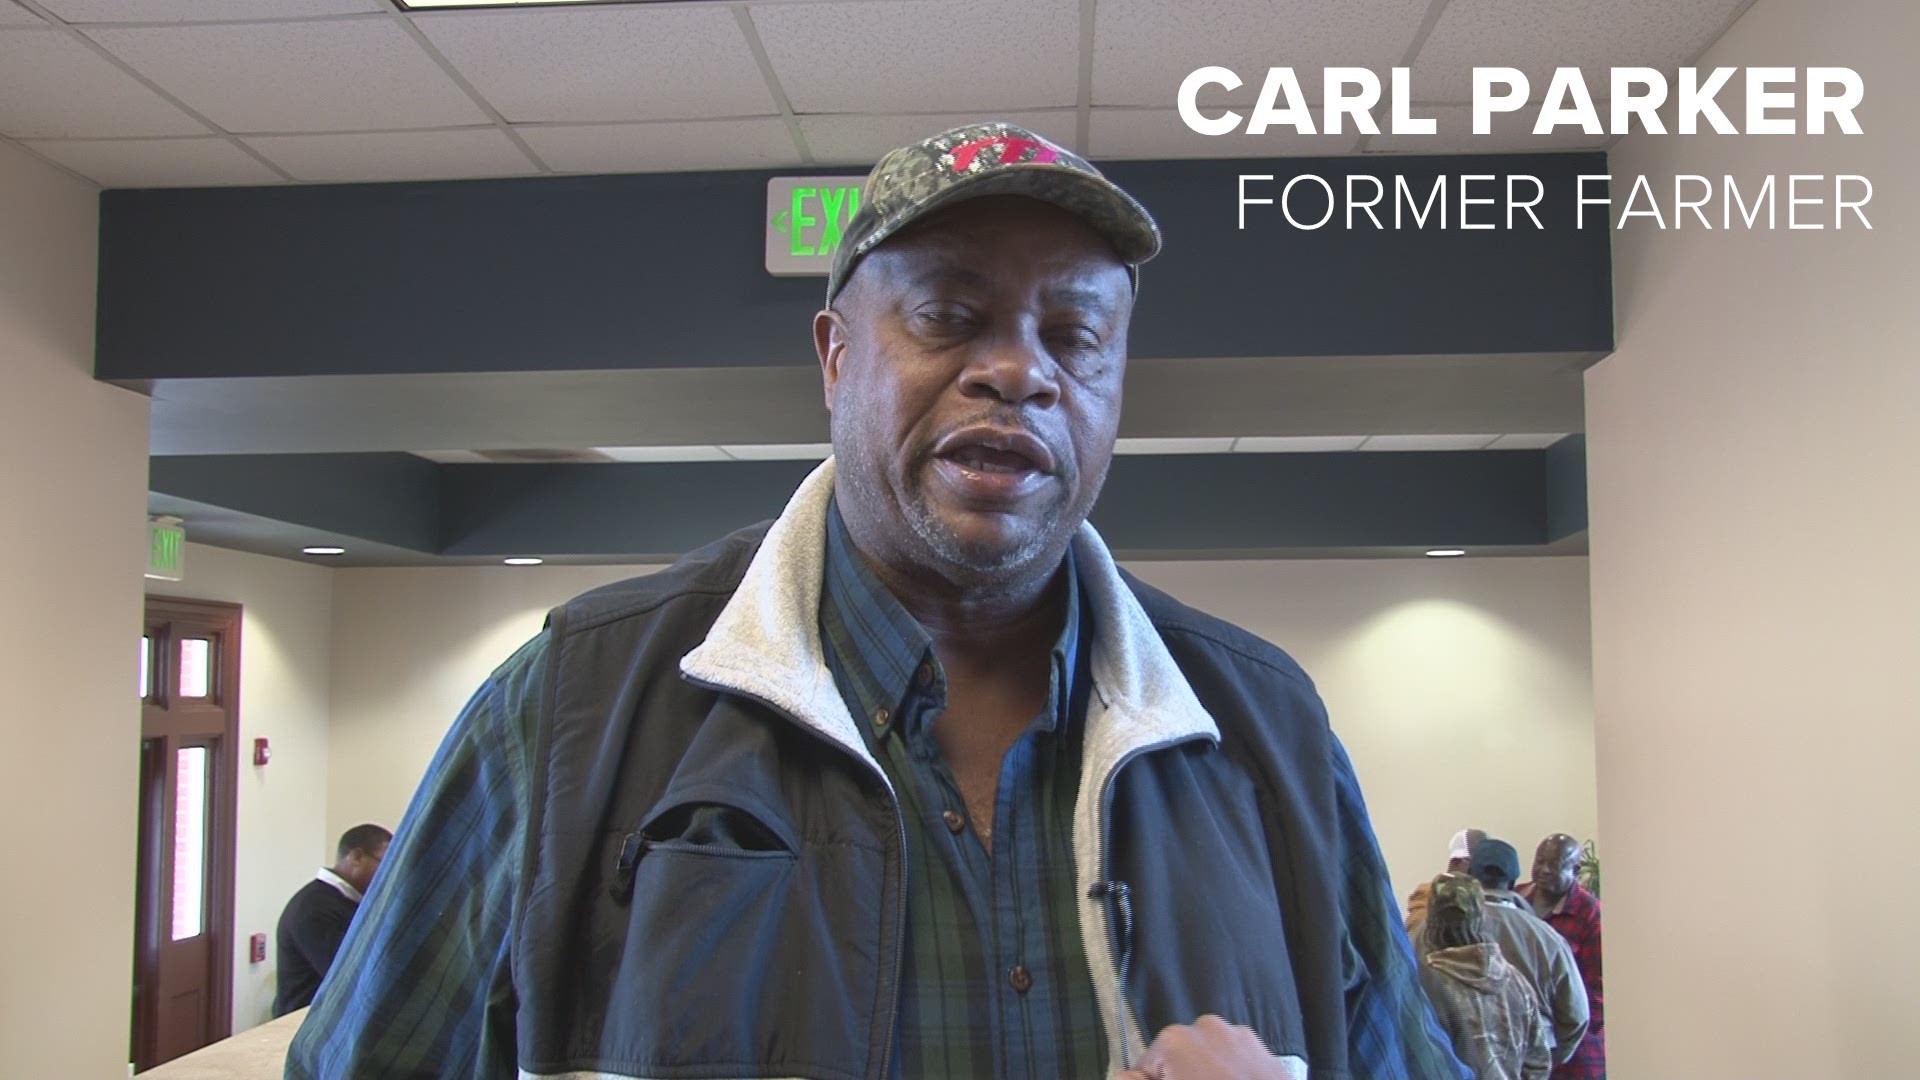 Carl Parker says he was forced out of farming, because he couldn't get necessary funding.